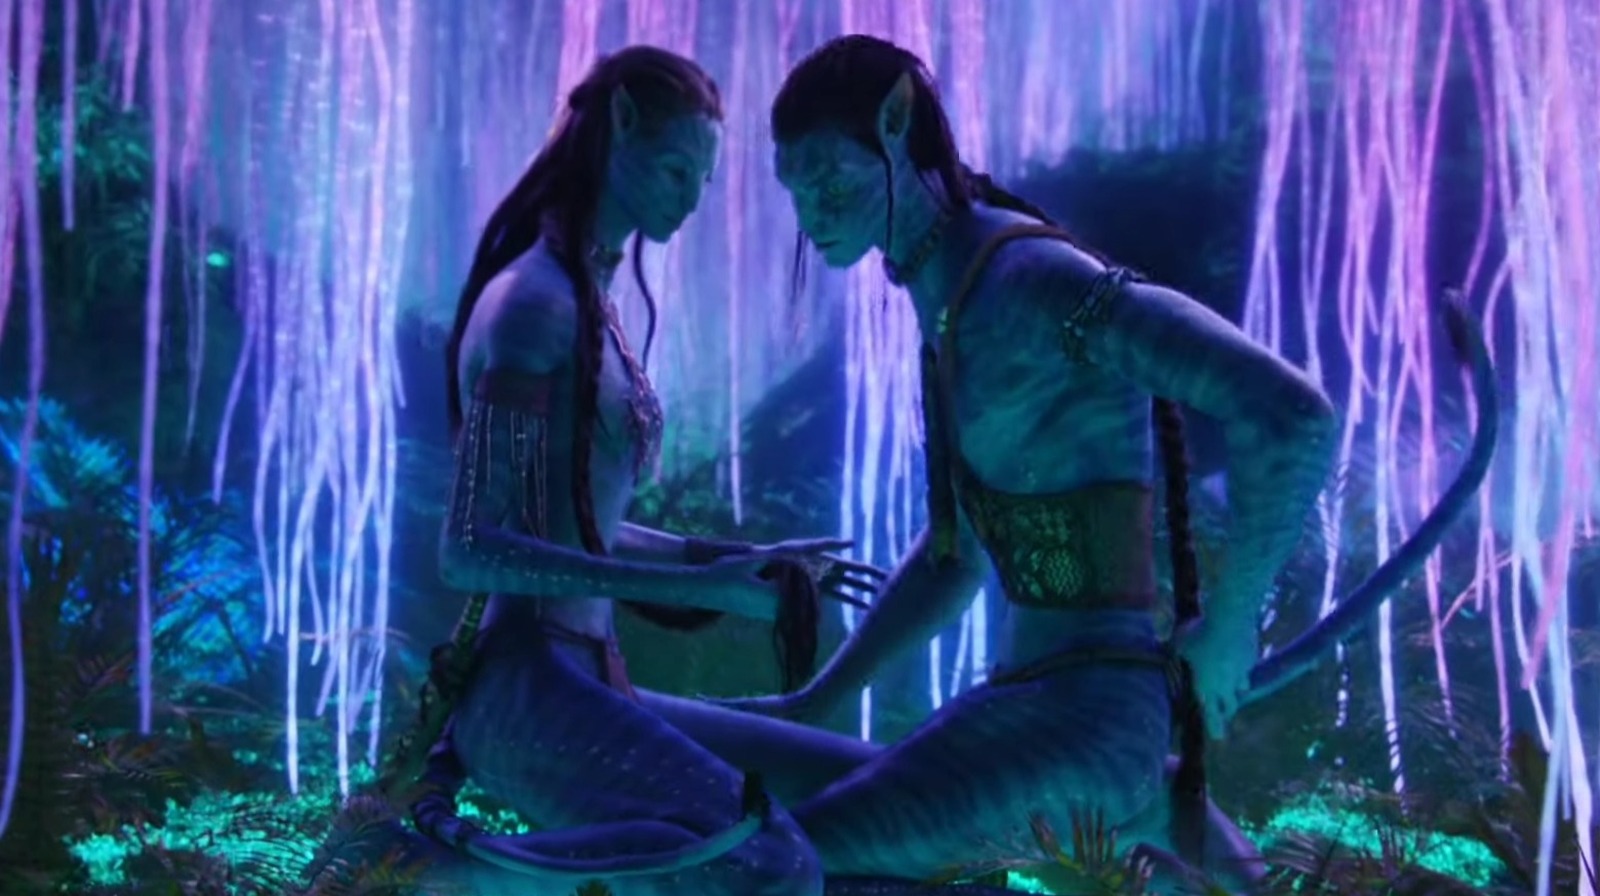 Is there any sex scenes in avatar